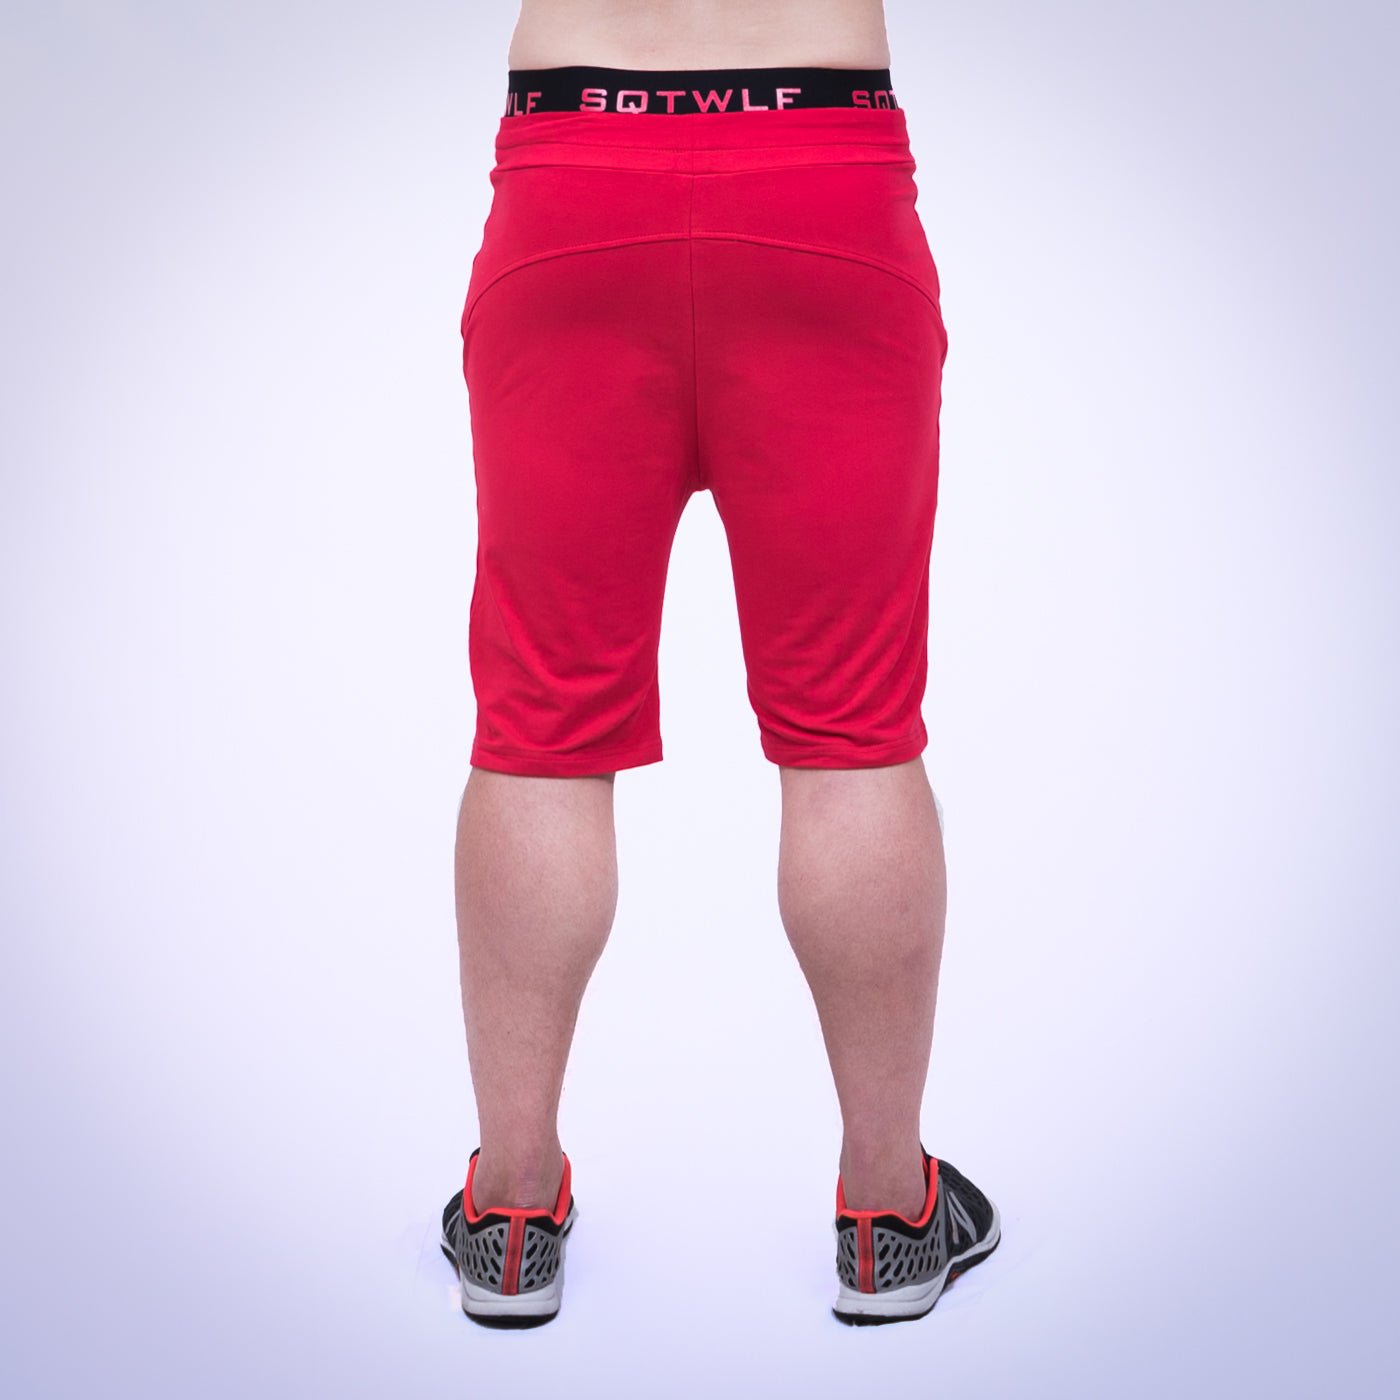 squatwolf-gym-wear-red-gym-shorts-workout-short-for-men